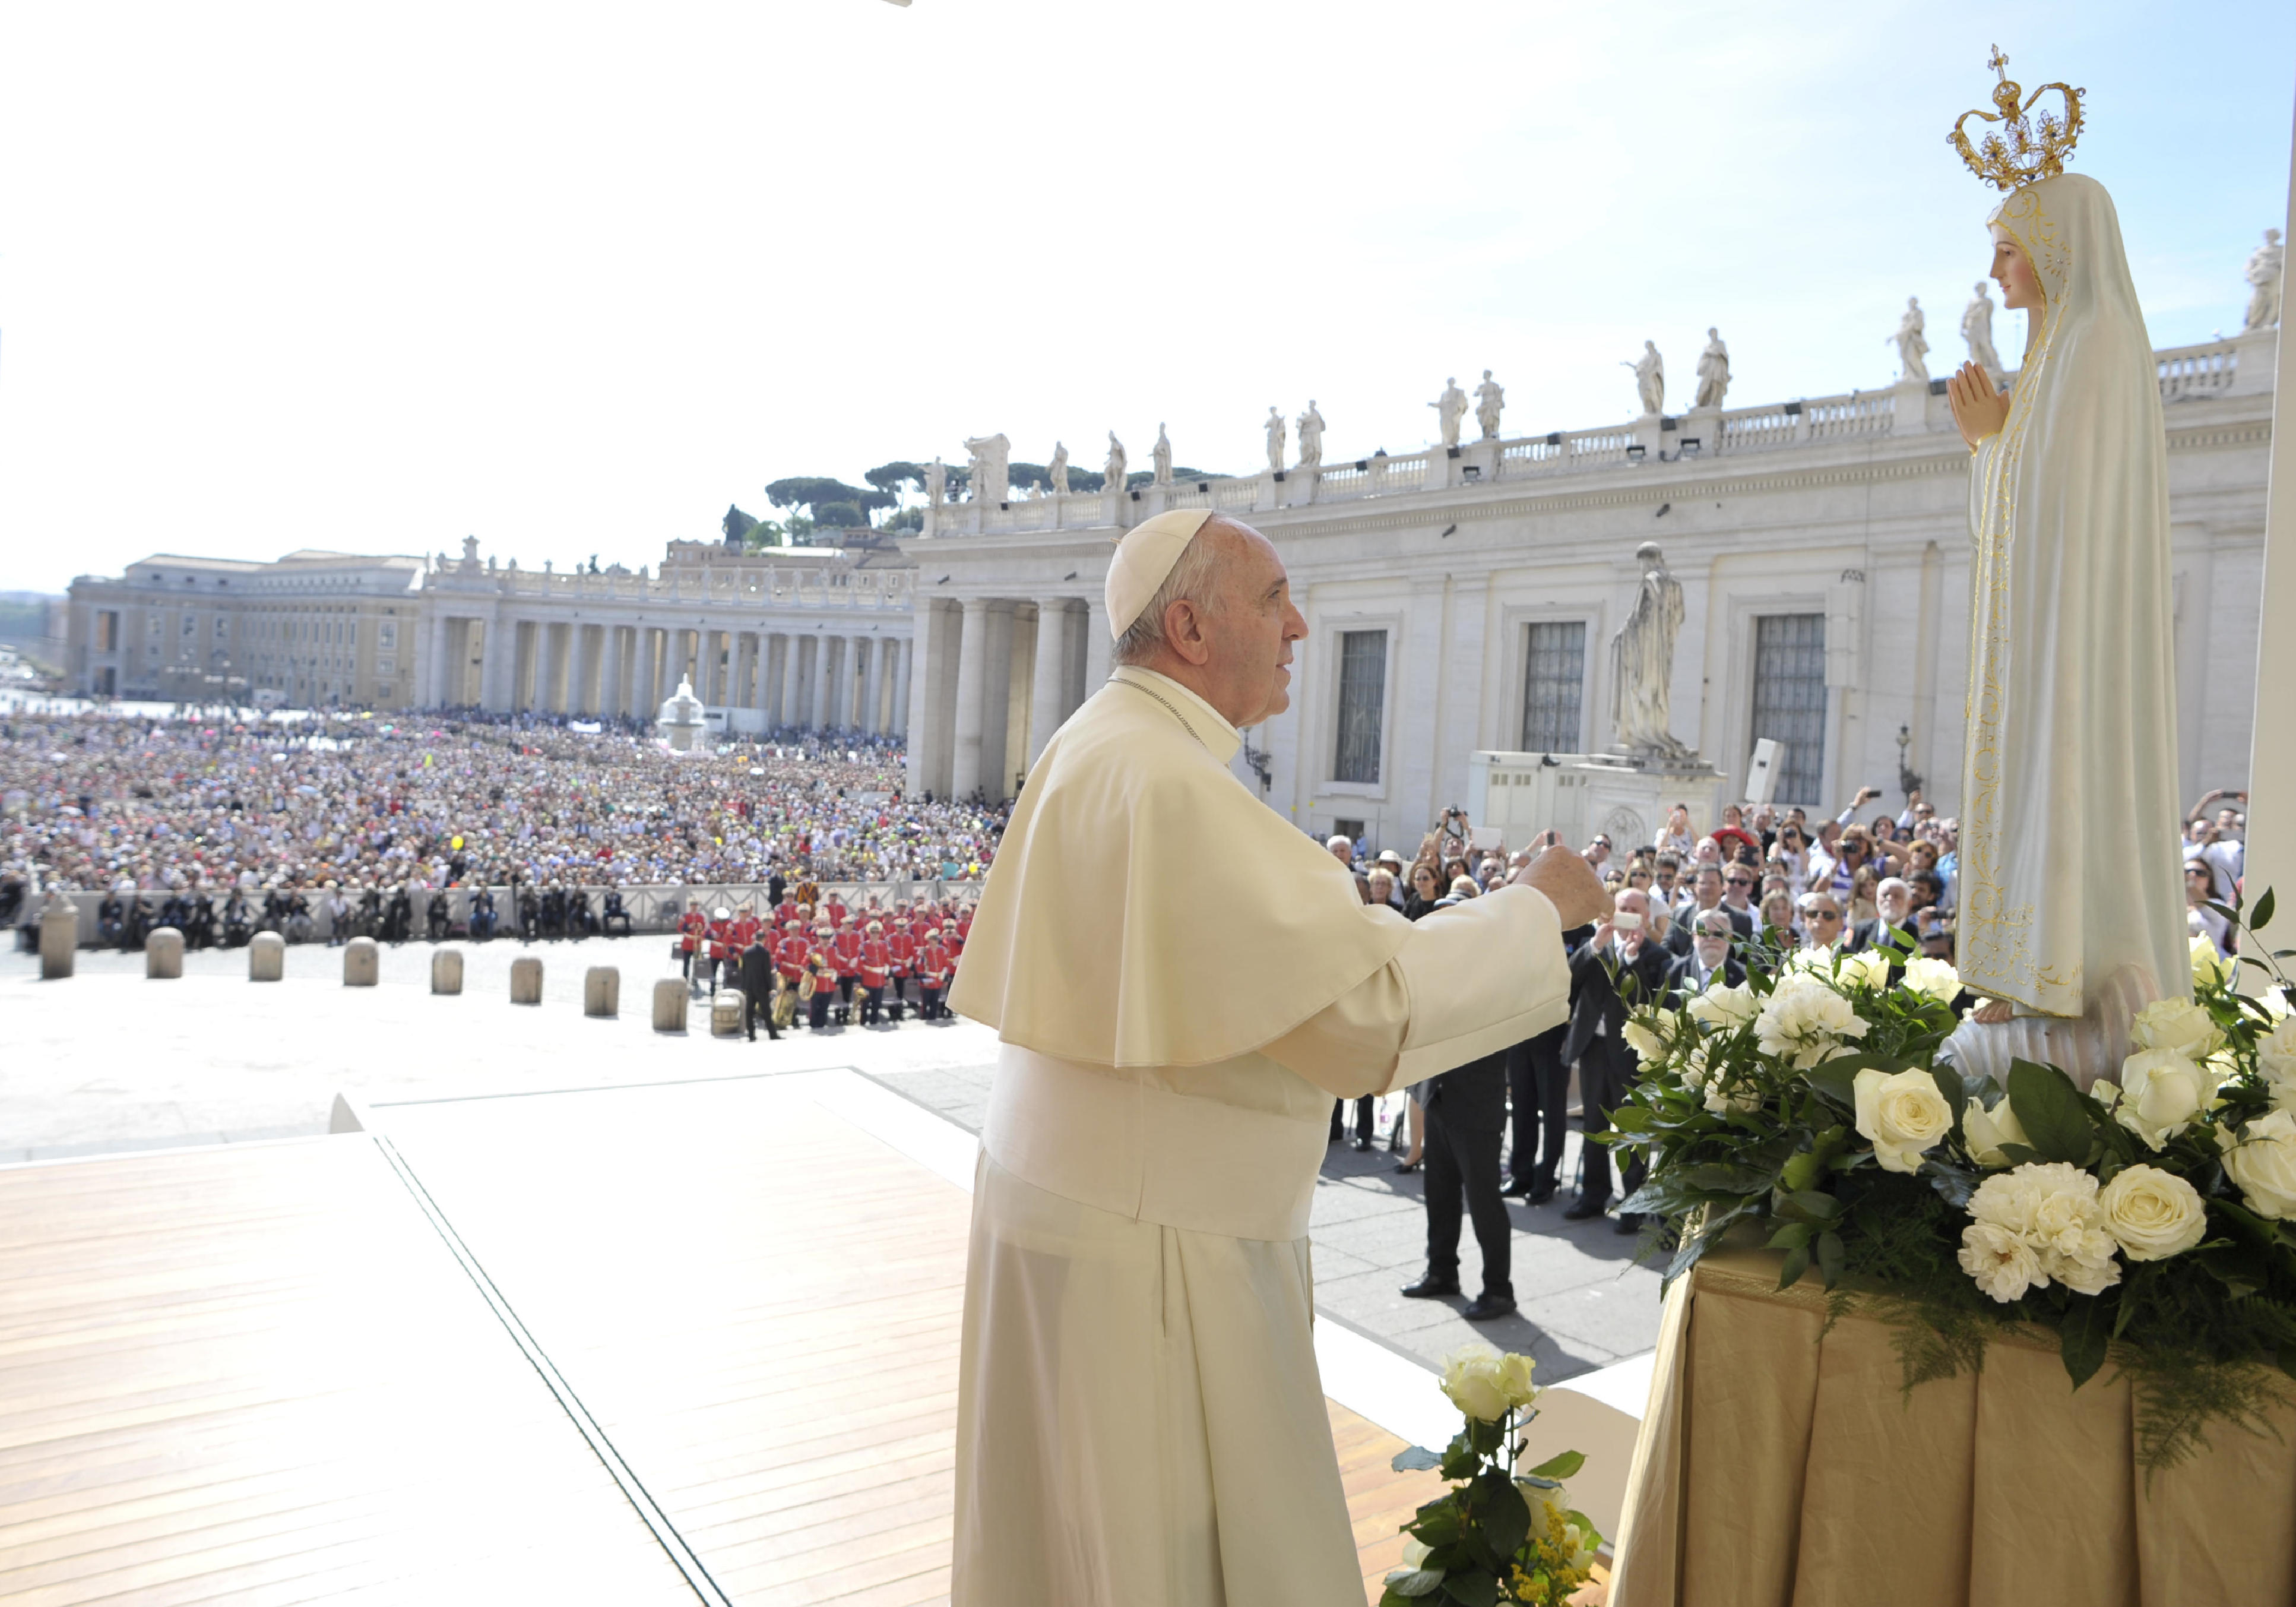 Pope Francis in front of a statue of Our Lady of Fatima during the General Audience of Wednesday 13th of May 2015